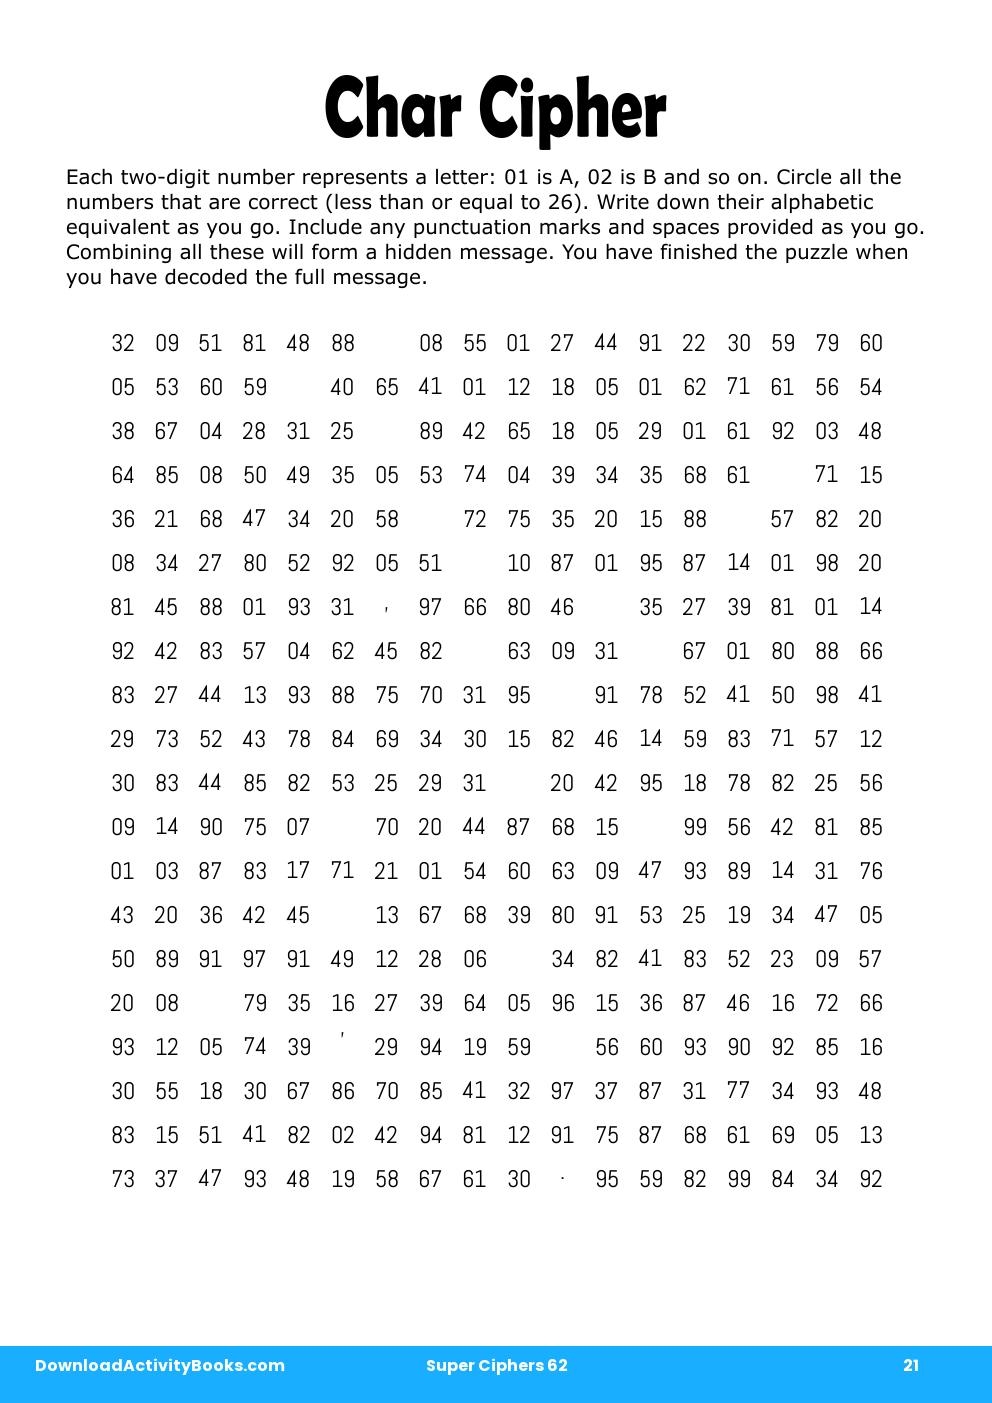 Char Cipher in Super Ciphers 62